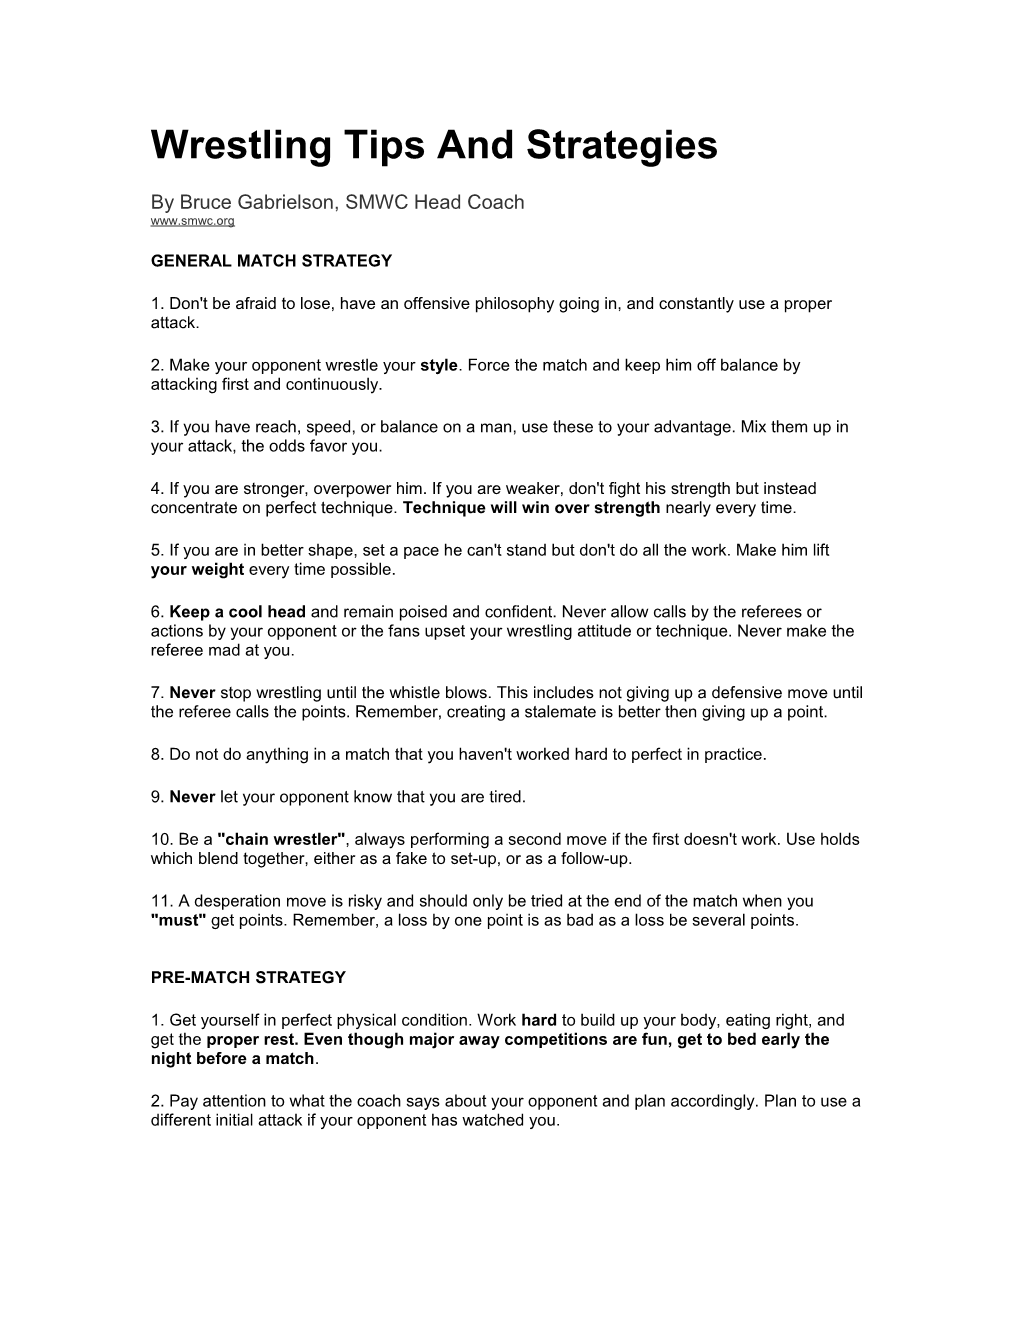 Wrestling Tips and Strategies